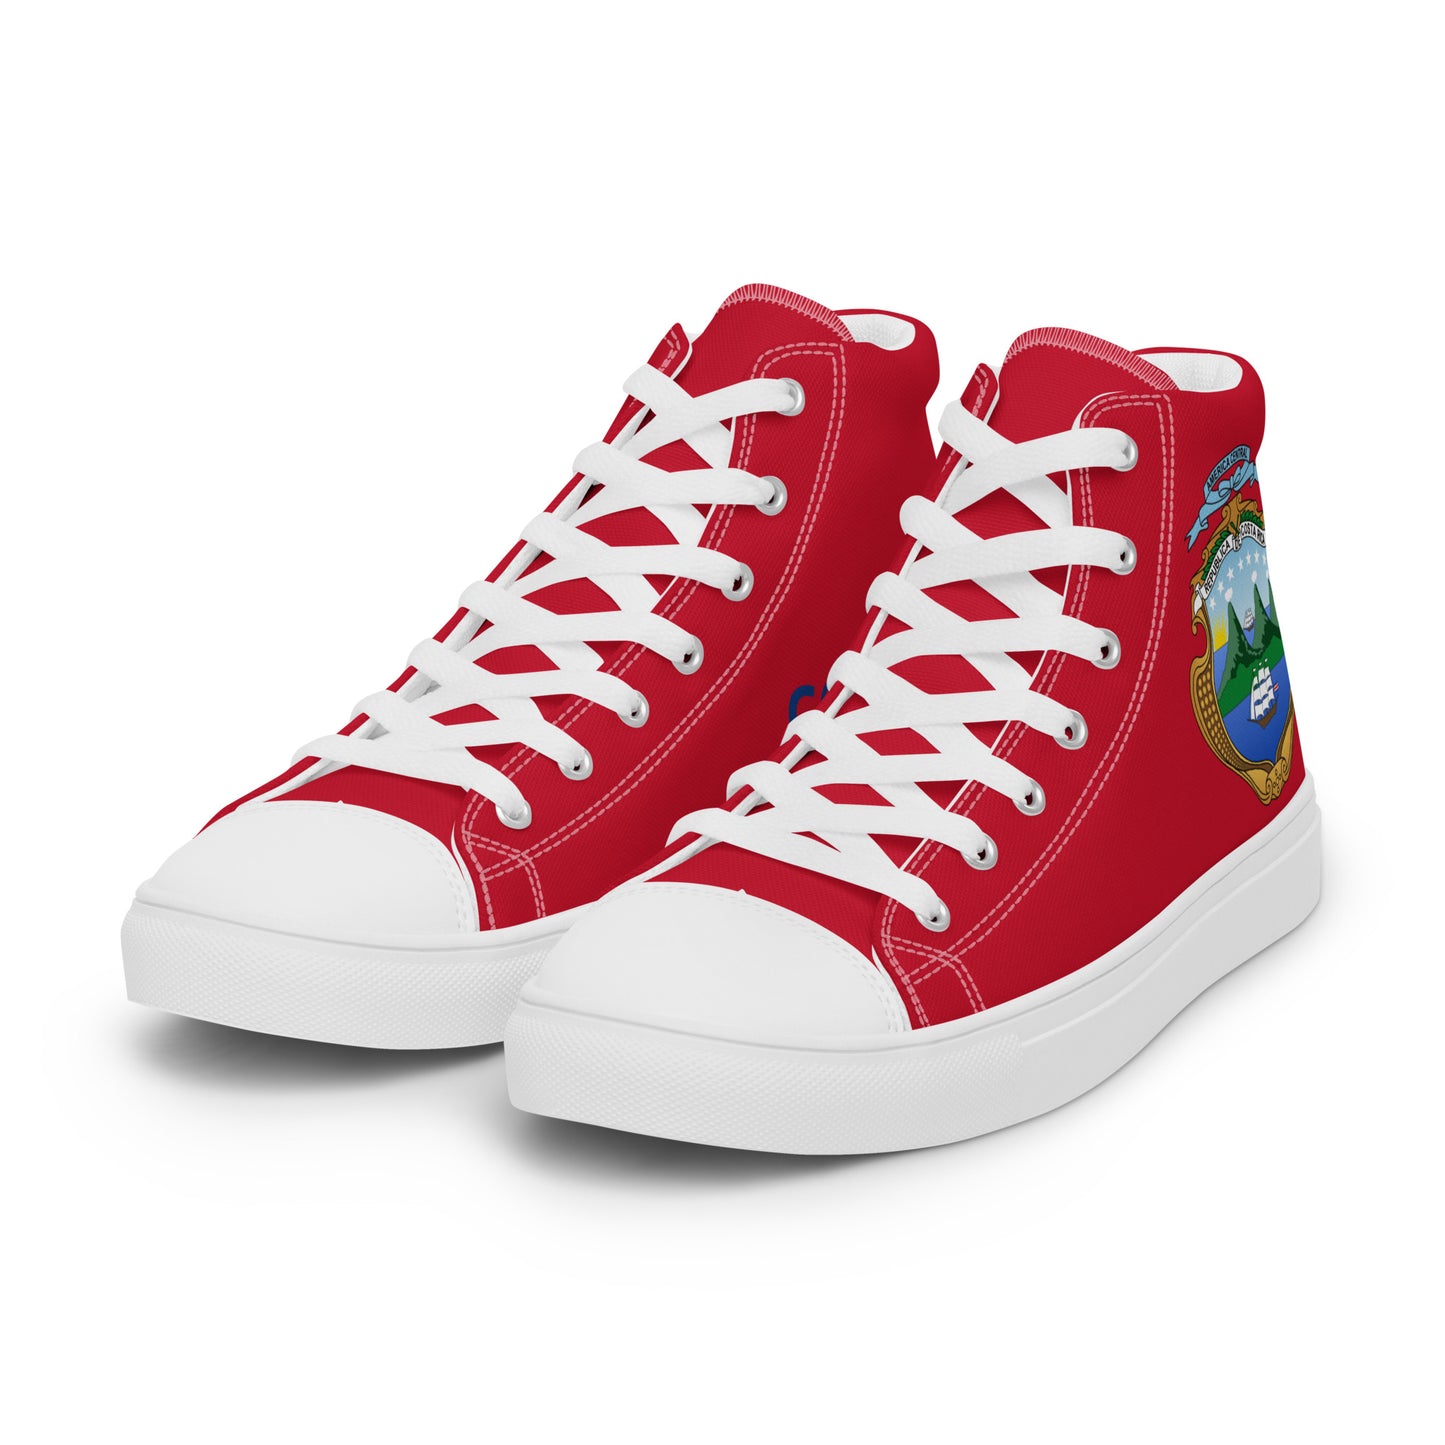 Costa Rica - Women - Red - High top shoes